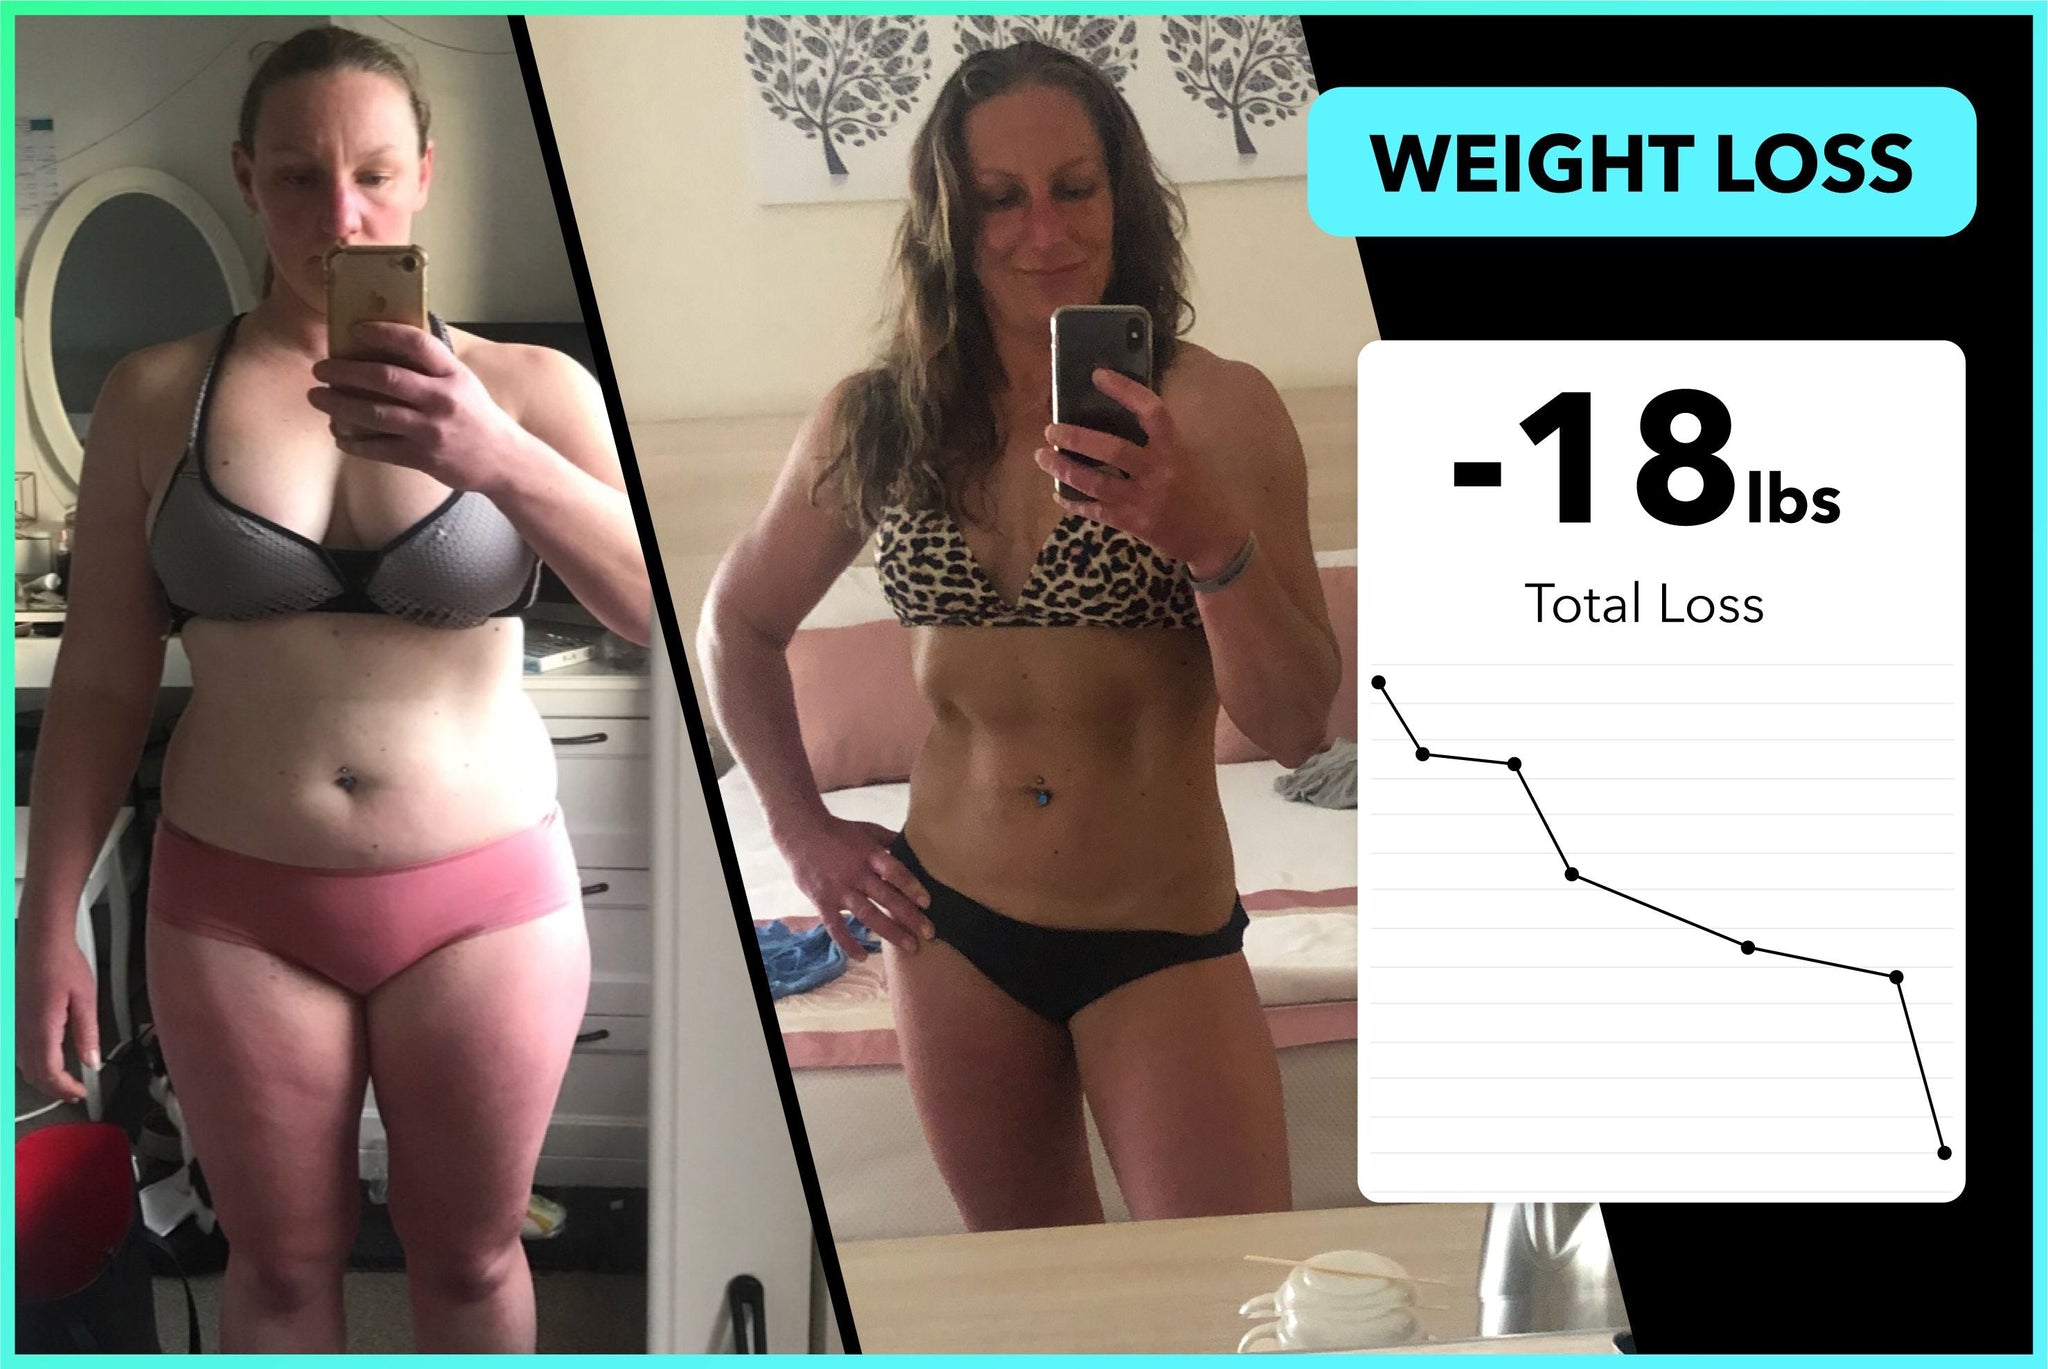 Claire has lost 18lbs with Team RH!